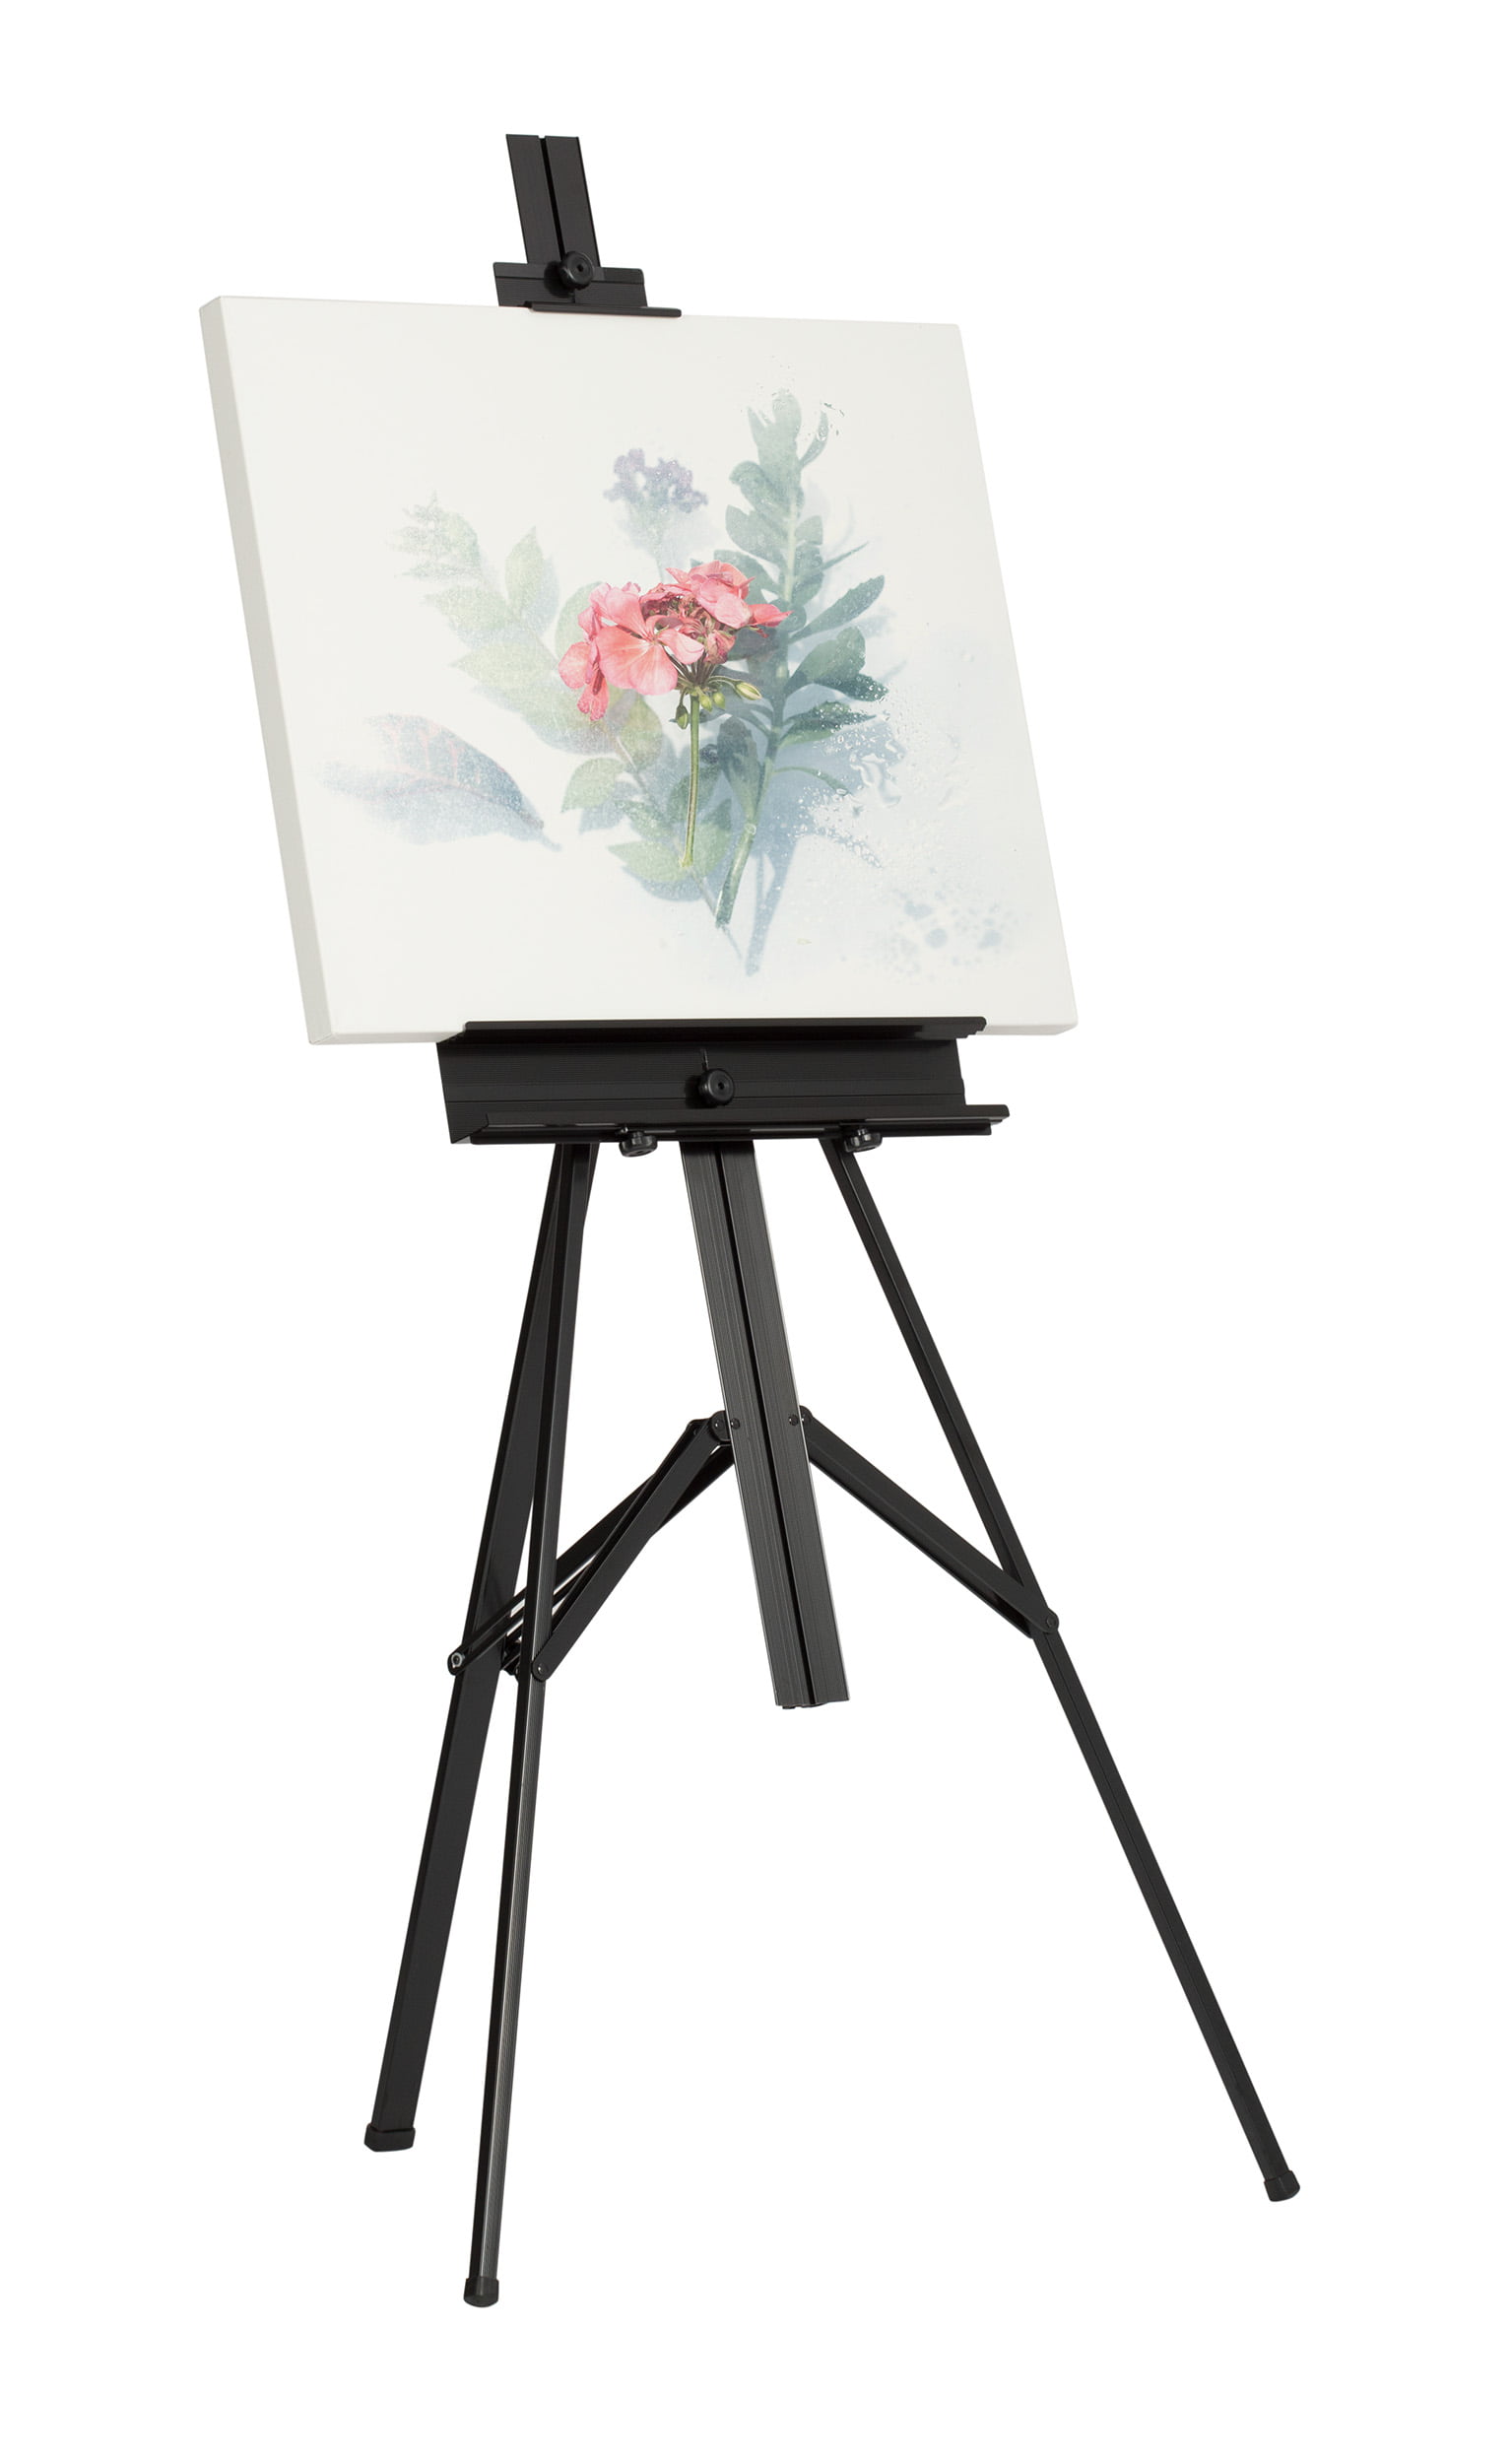 NIECHO 66 Inches Black Easel Stand,Aluminum Metal Easels for Painting  Canvas Adjustable Height from 17 to 66 with Carry Bag for Table-Top/Floor